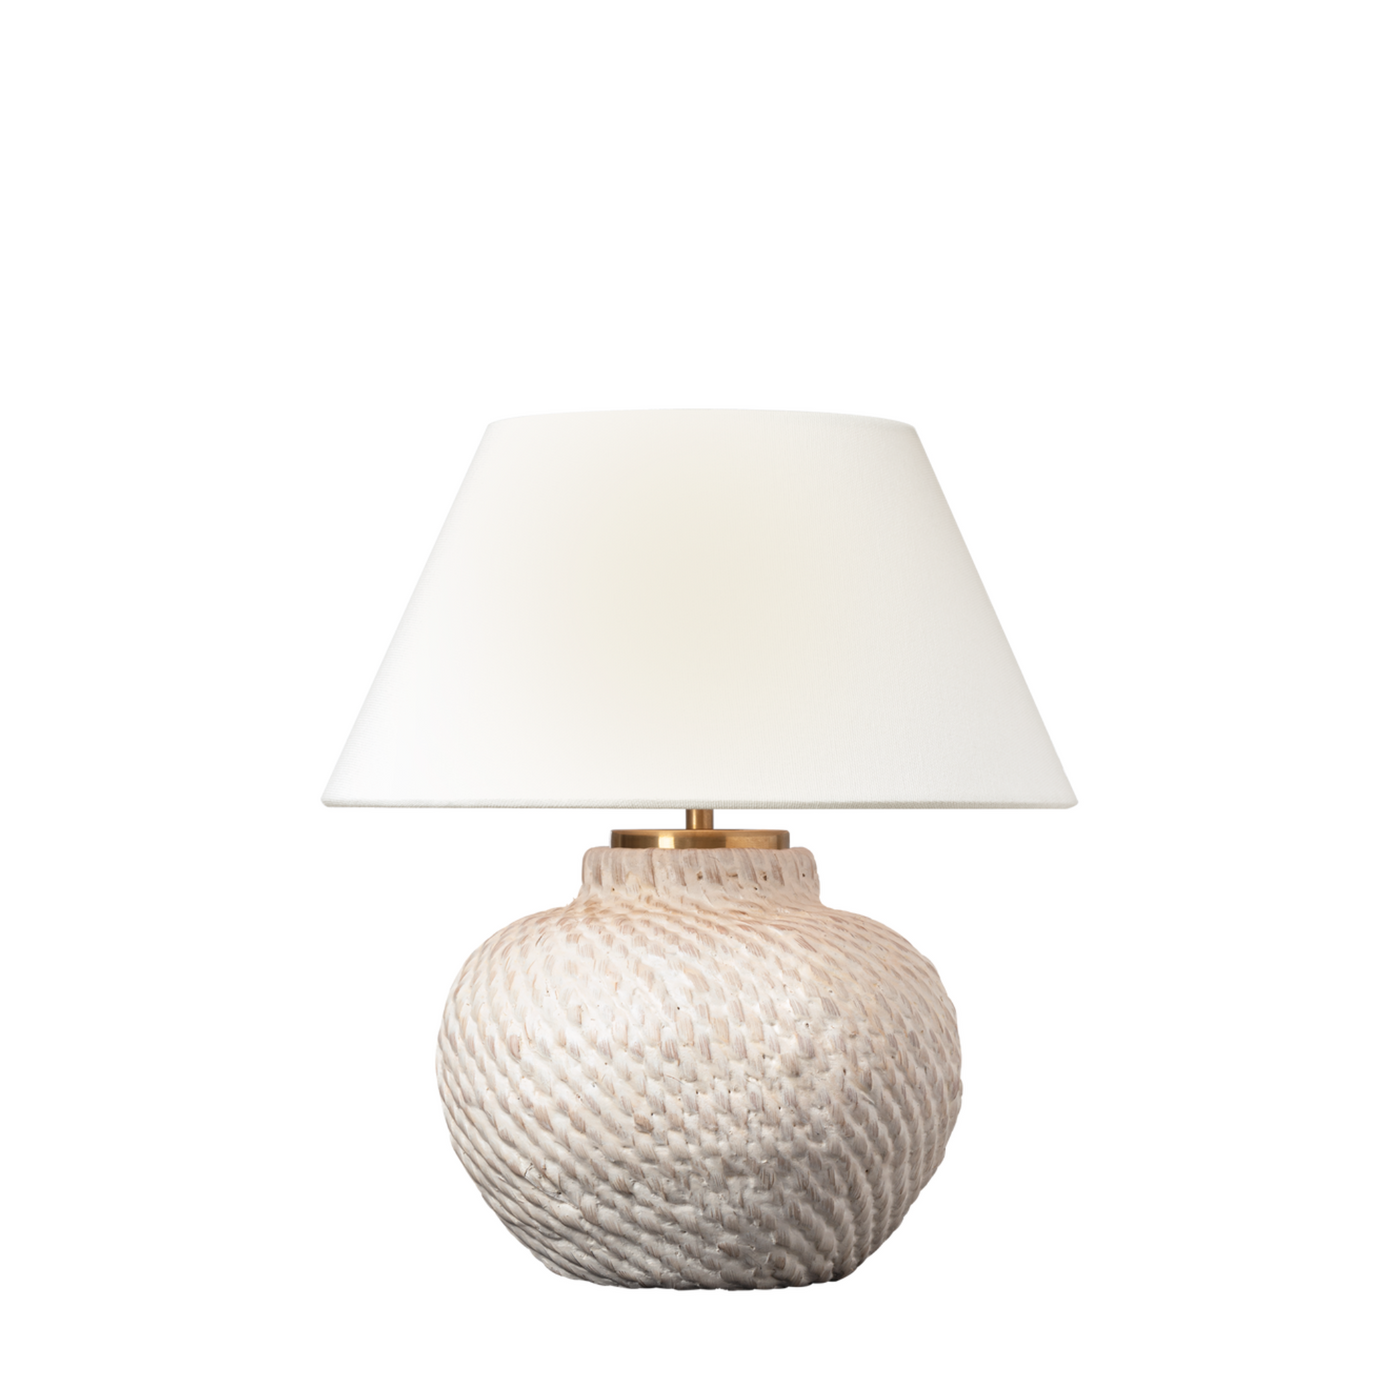 Avedon 11" Cordless Accent Table Lamp | Newport Lamp And Shade | Located in Newport, RI